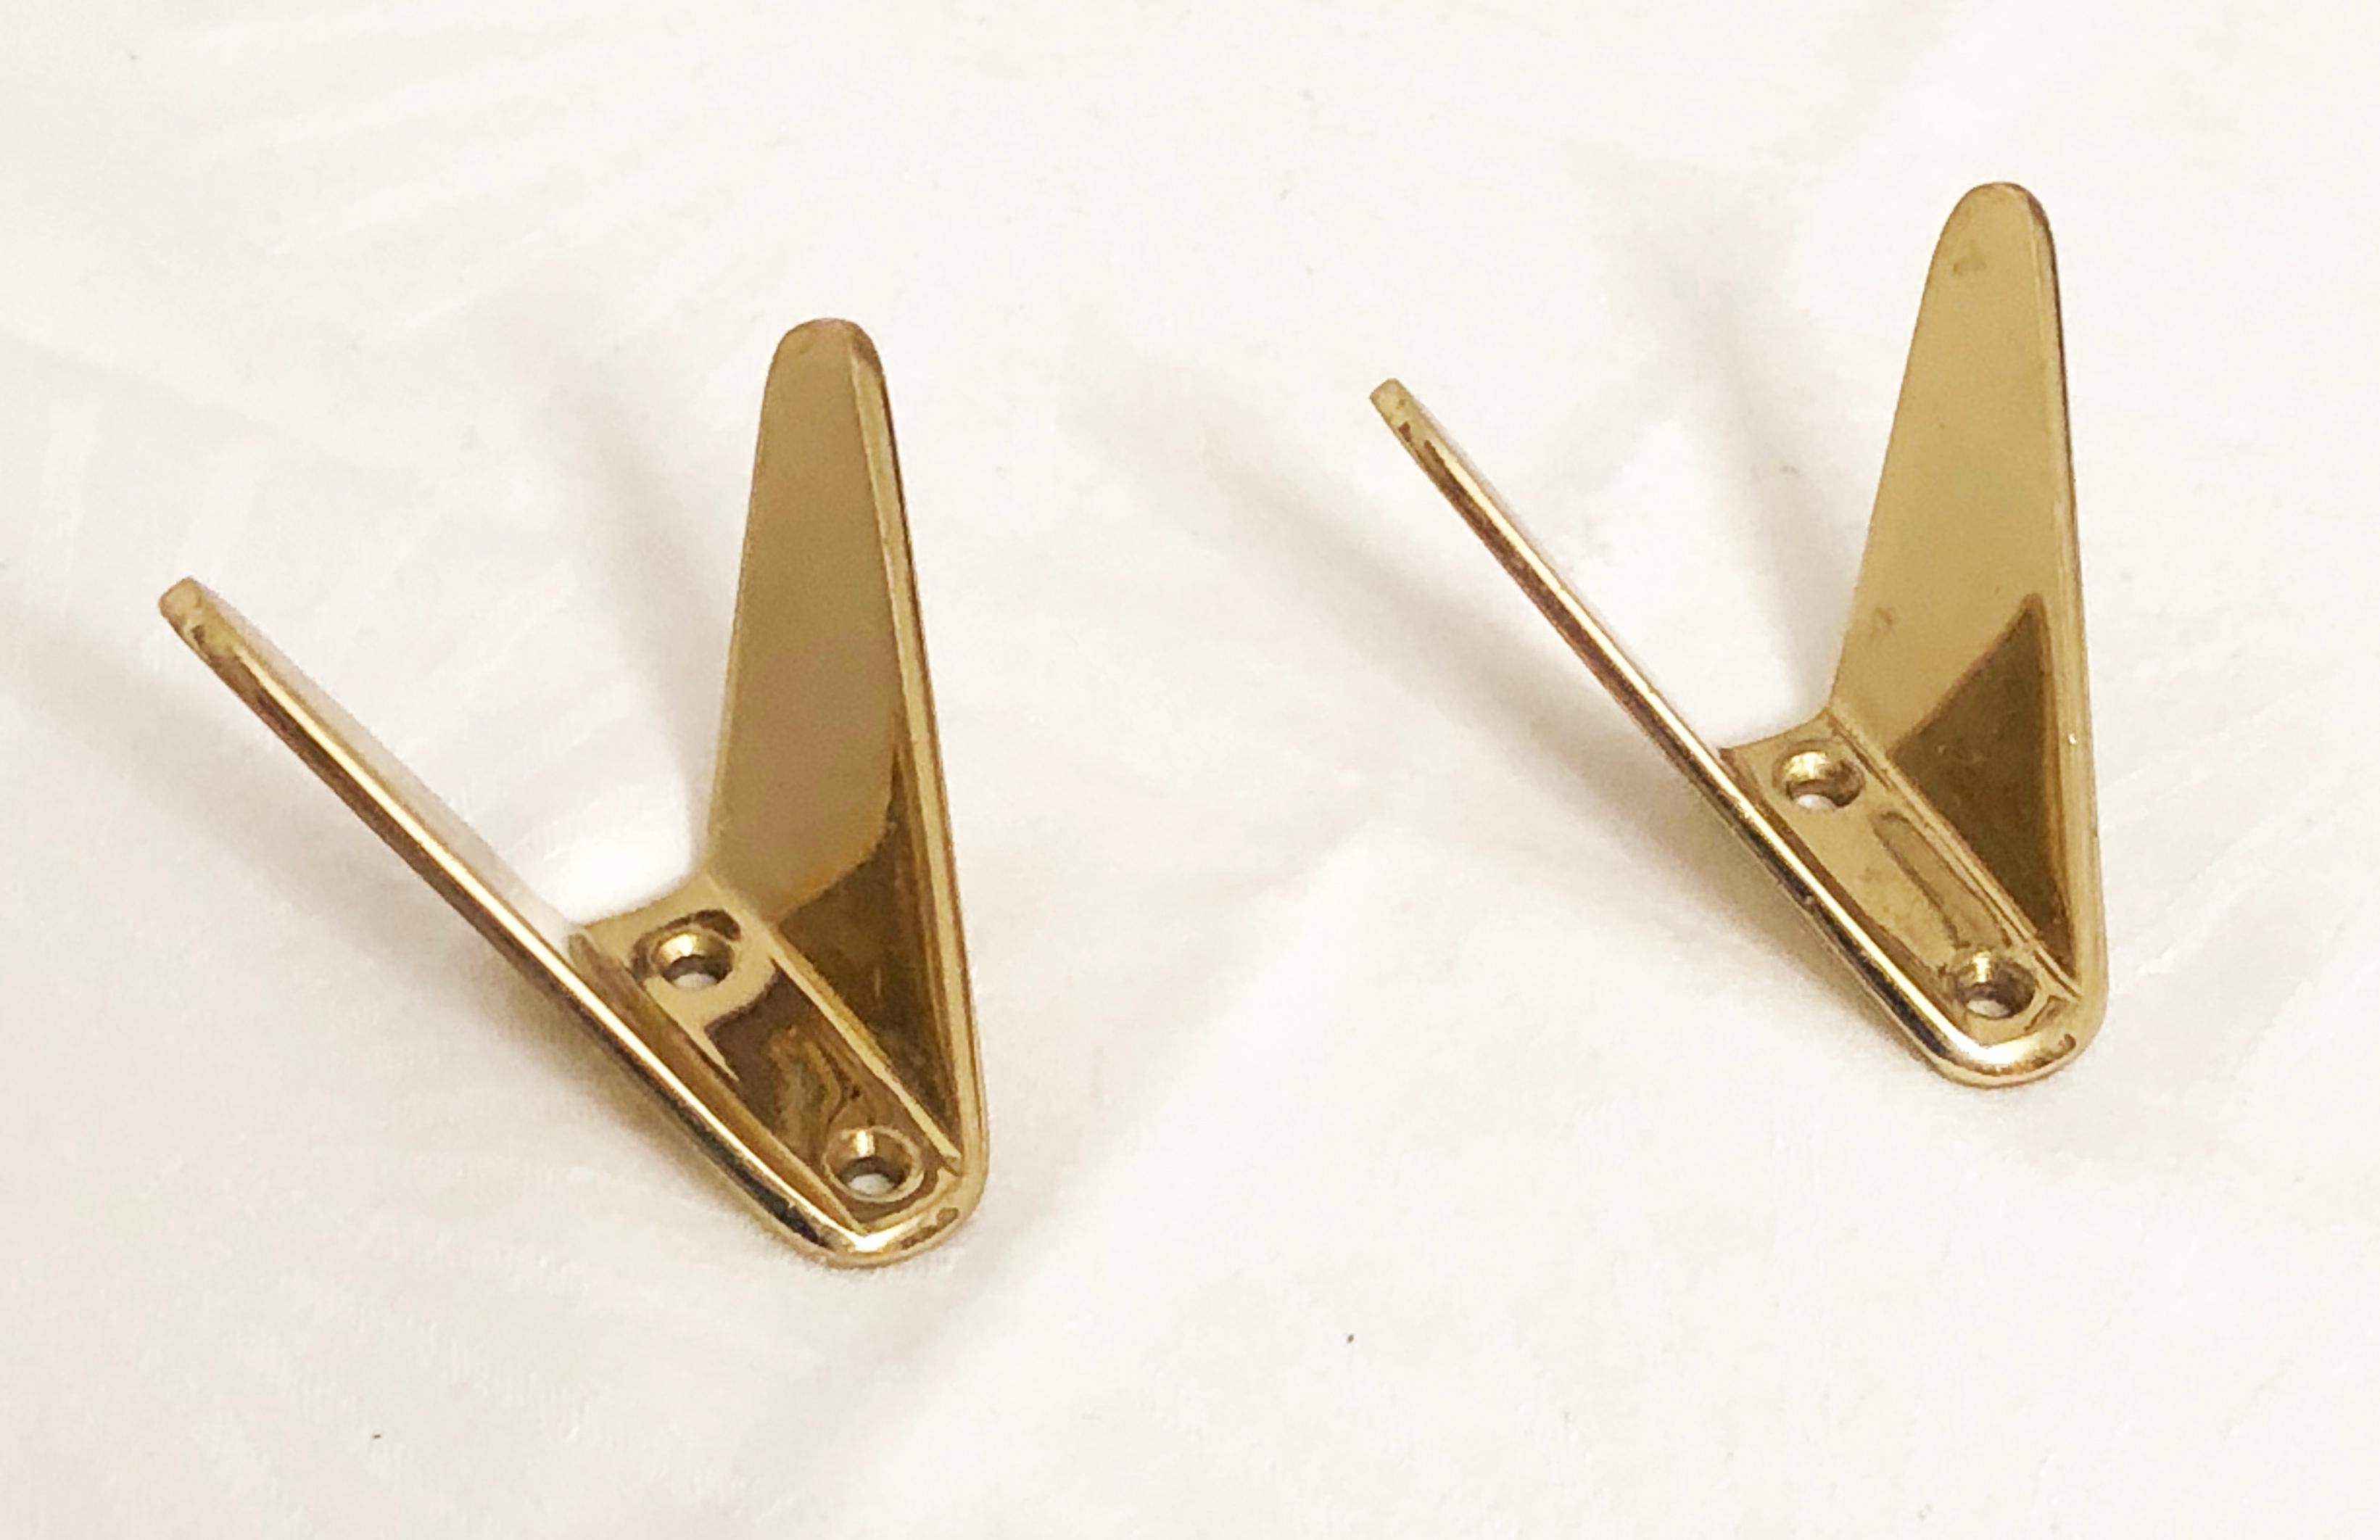 Beautiful Austrian brass hooks manufactured by Hertha Baller in Austria in the 1950s.
Up to 2 available. Price per hook.